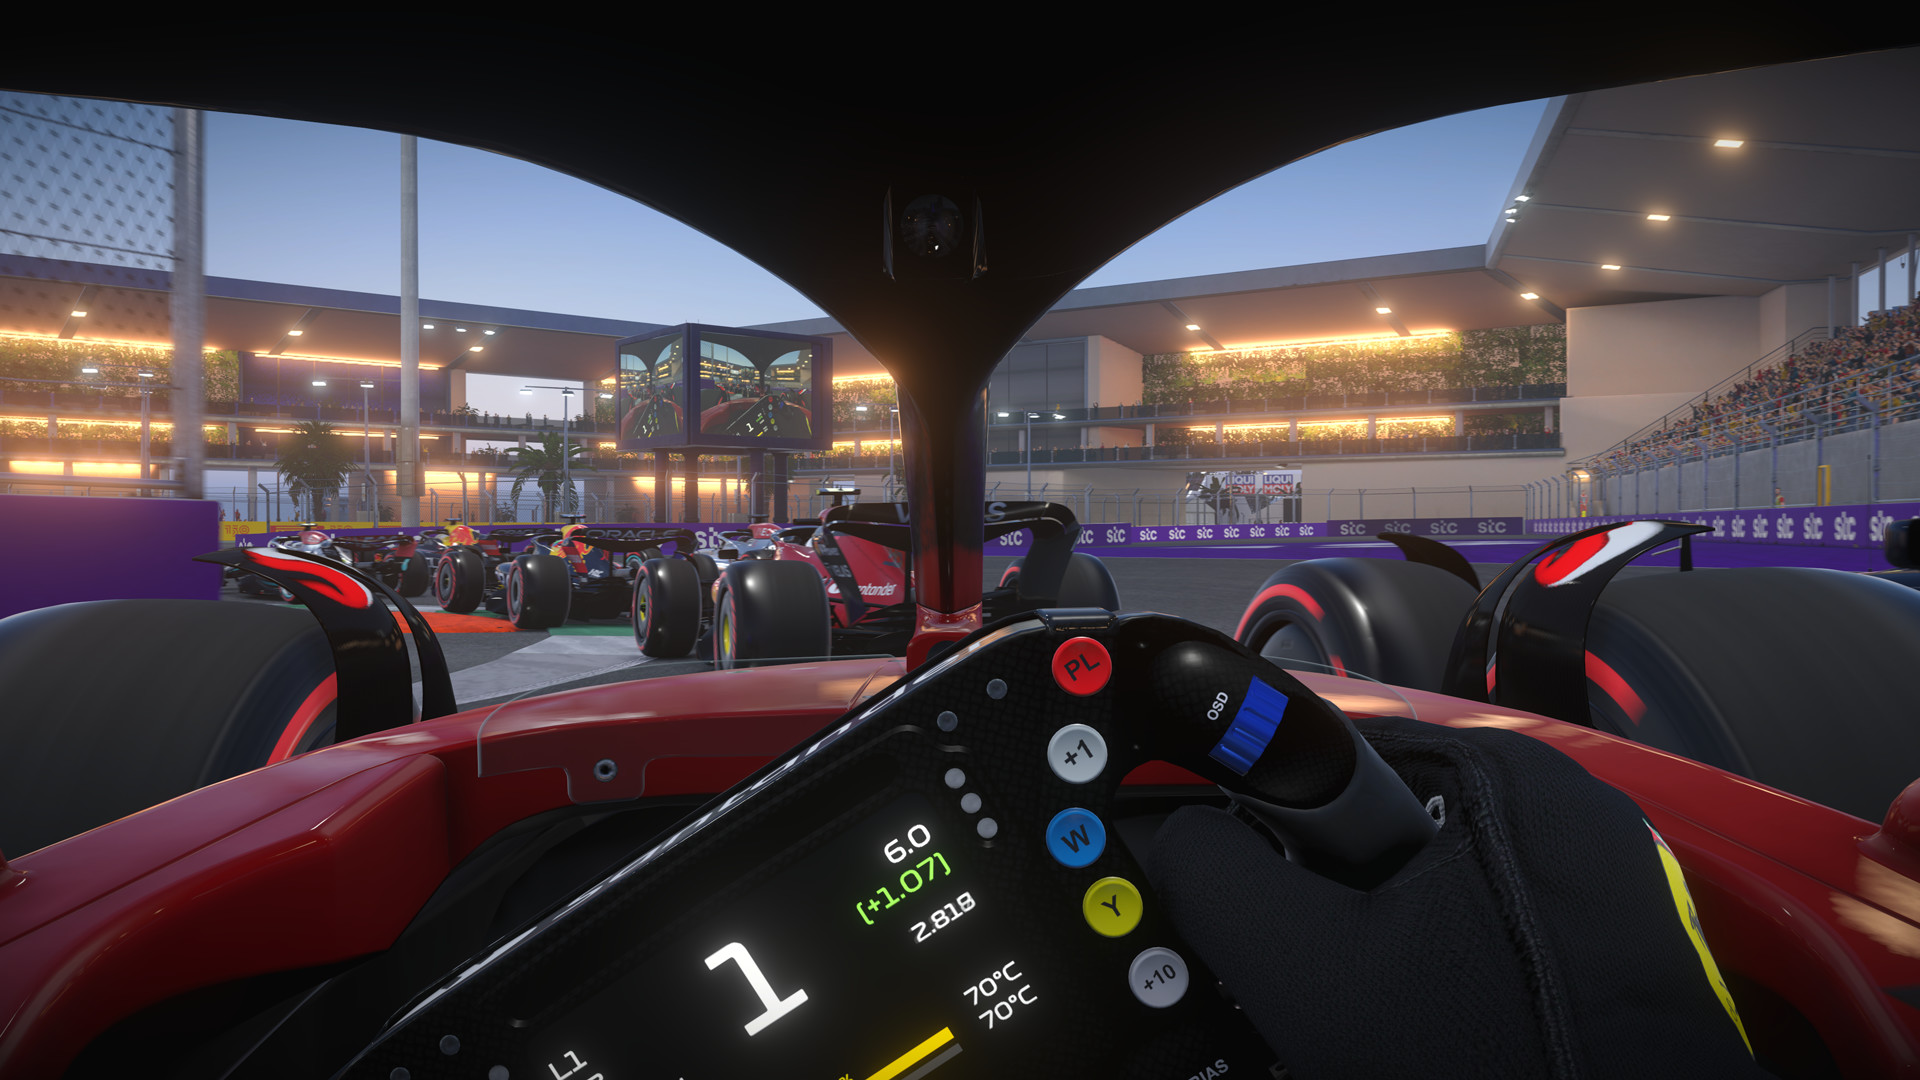 F1 2022: PC graphics performance benchmark review